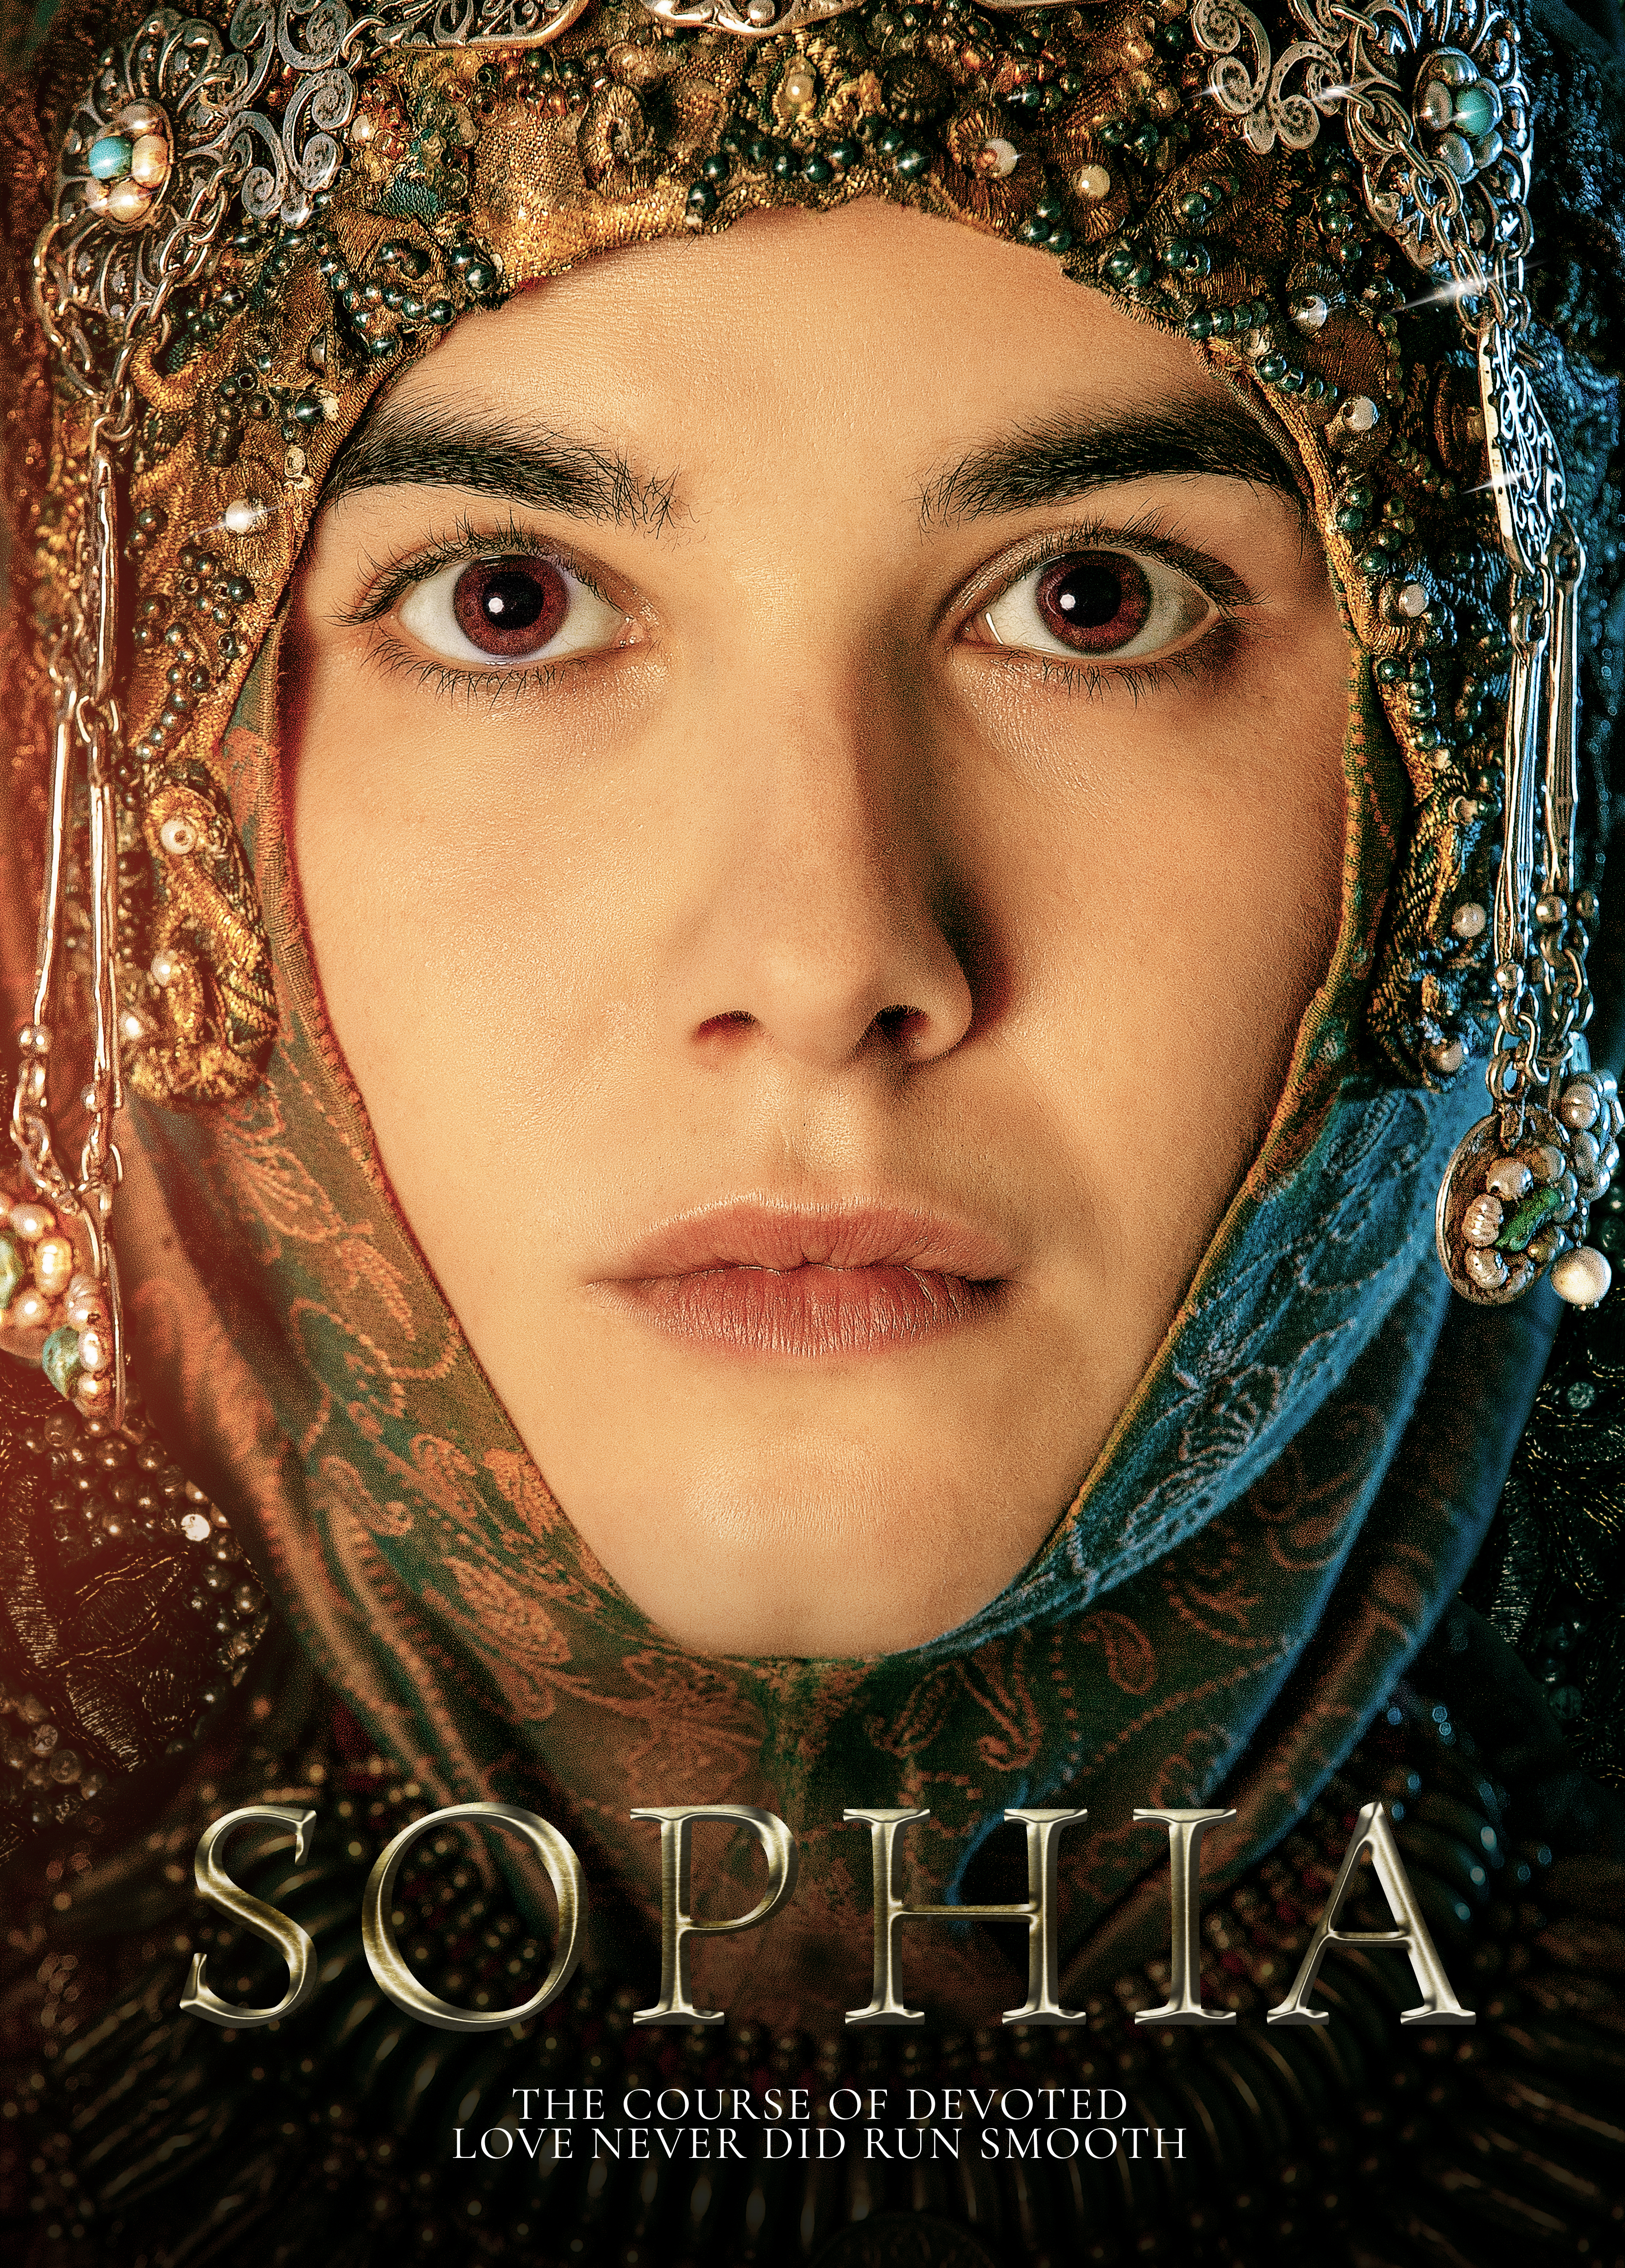 THE HISTORICAL SERIES SOPHIA SOLD TO THE MENA REGION